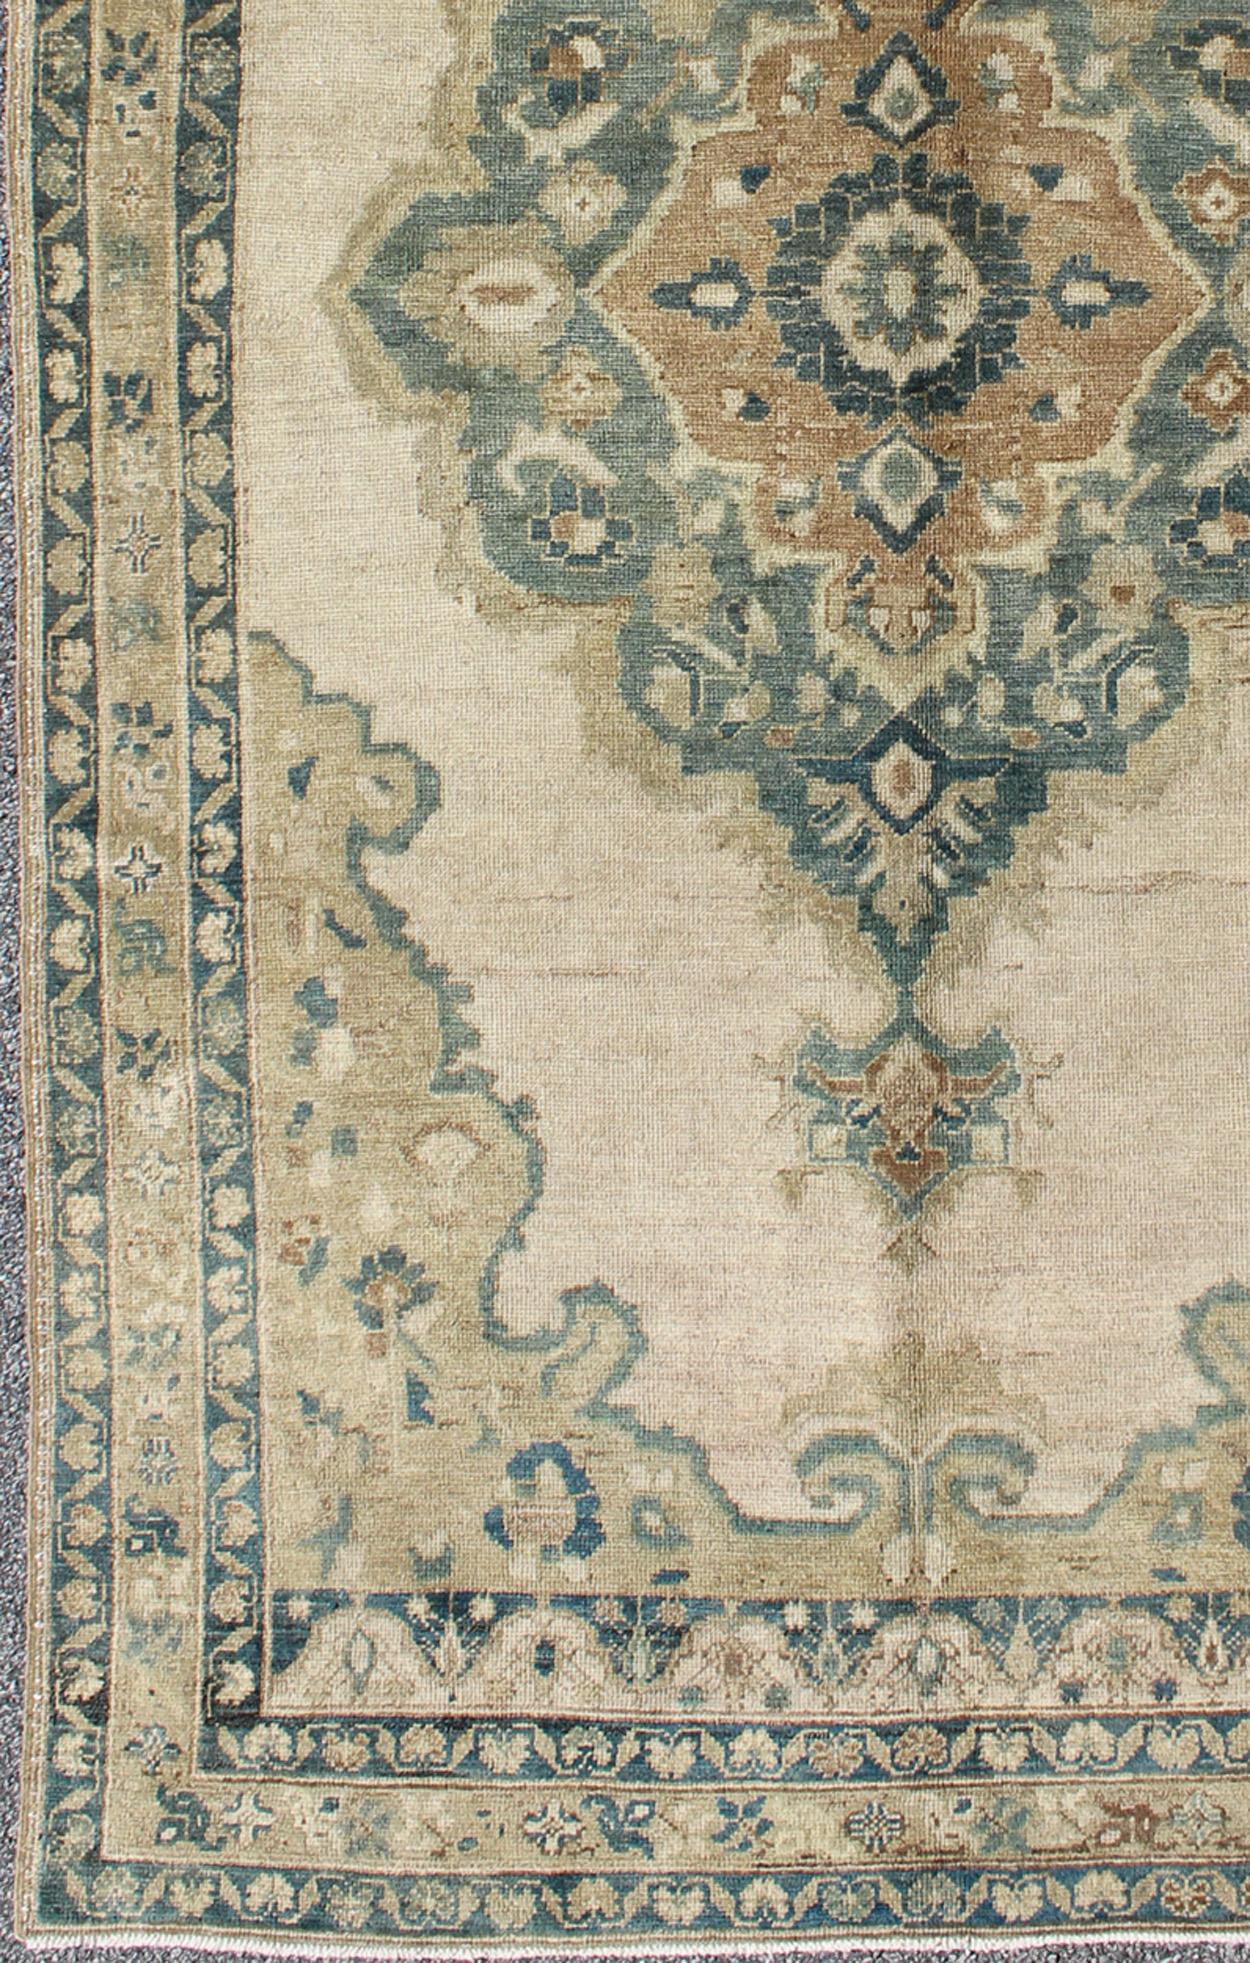 Turkish Vintage Oushak Rug with Floral Design in Blue/Green, Taupe, Ivory & Yellow Green For Sale